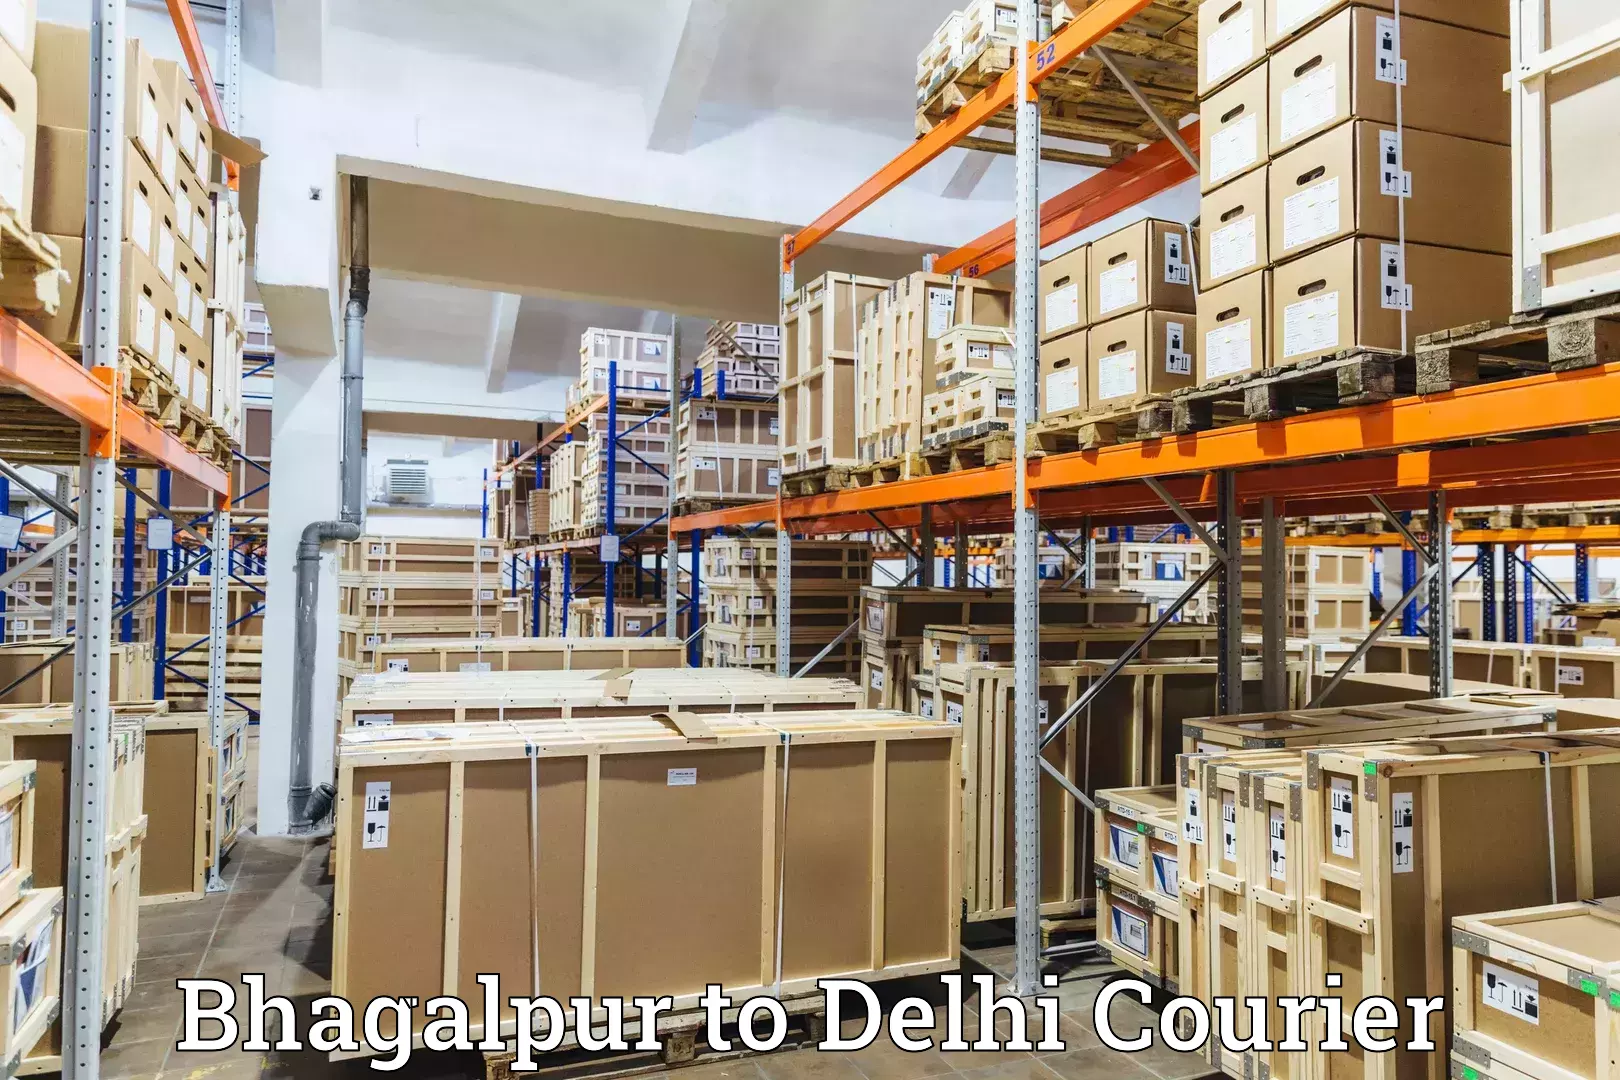 Sustainable delivery practices Bhagalpur to NCR